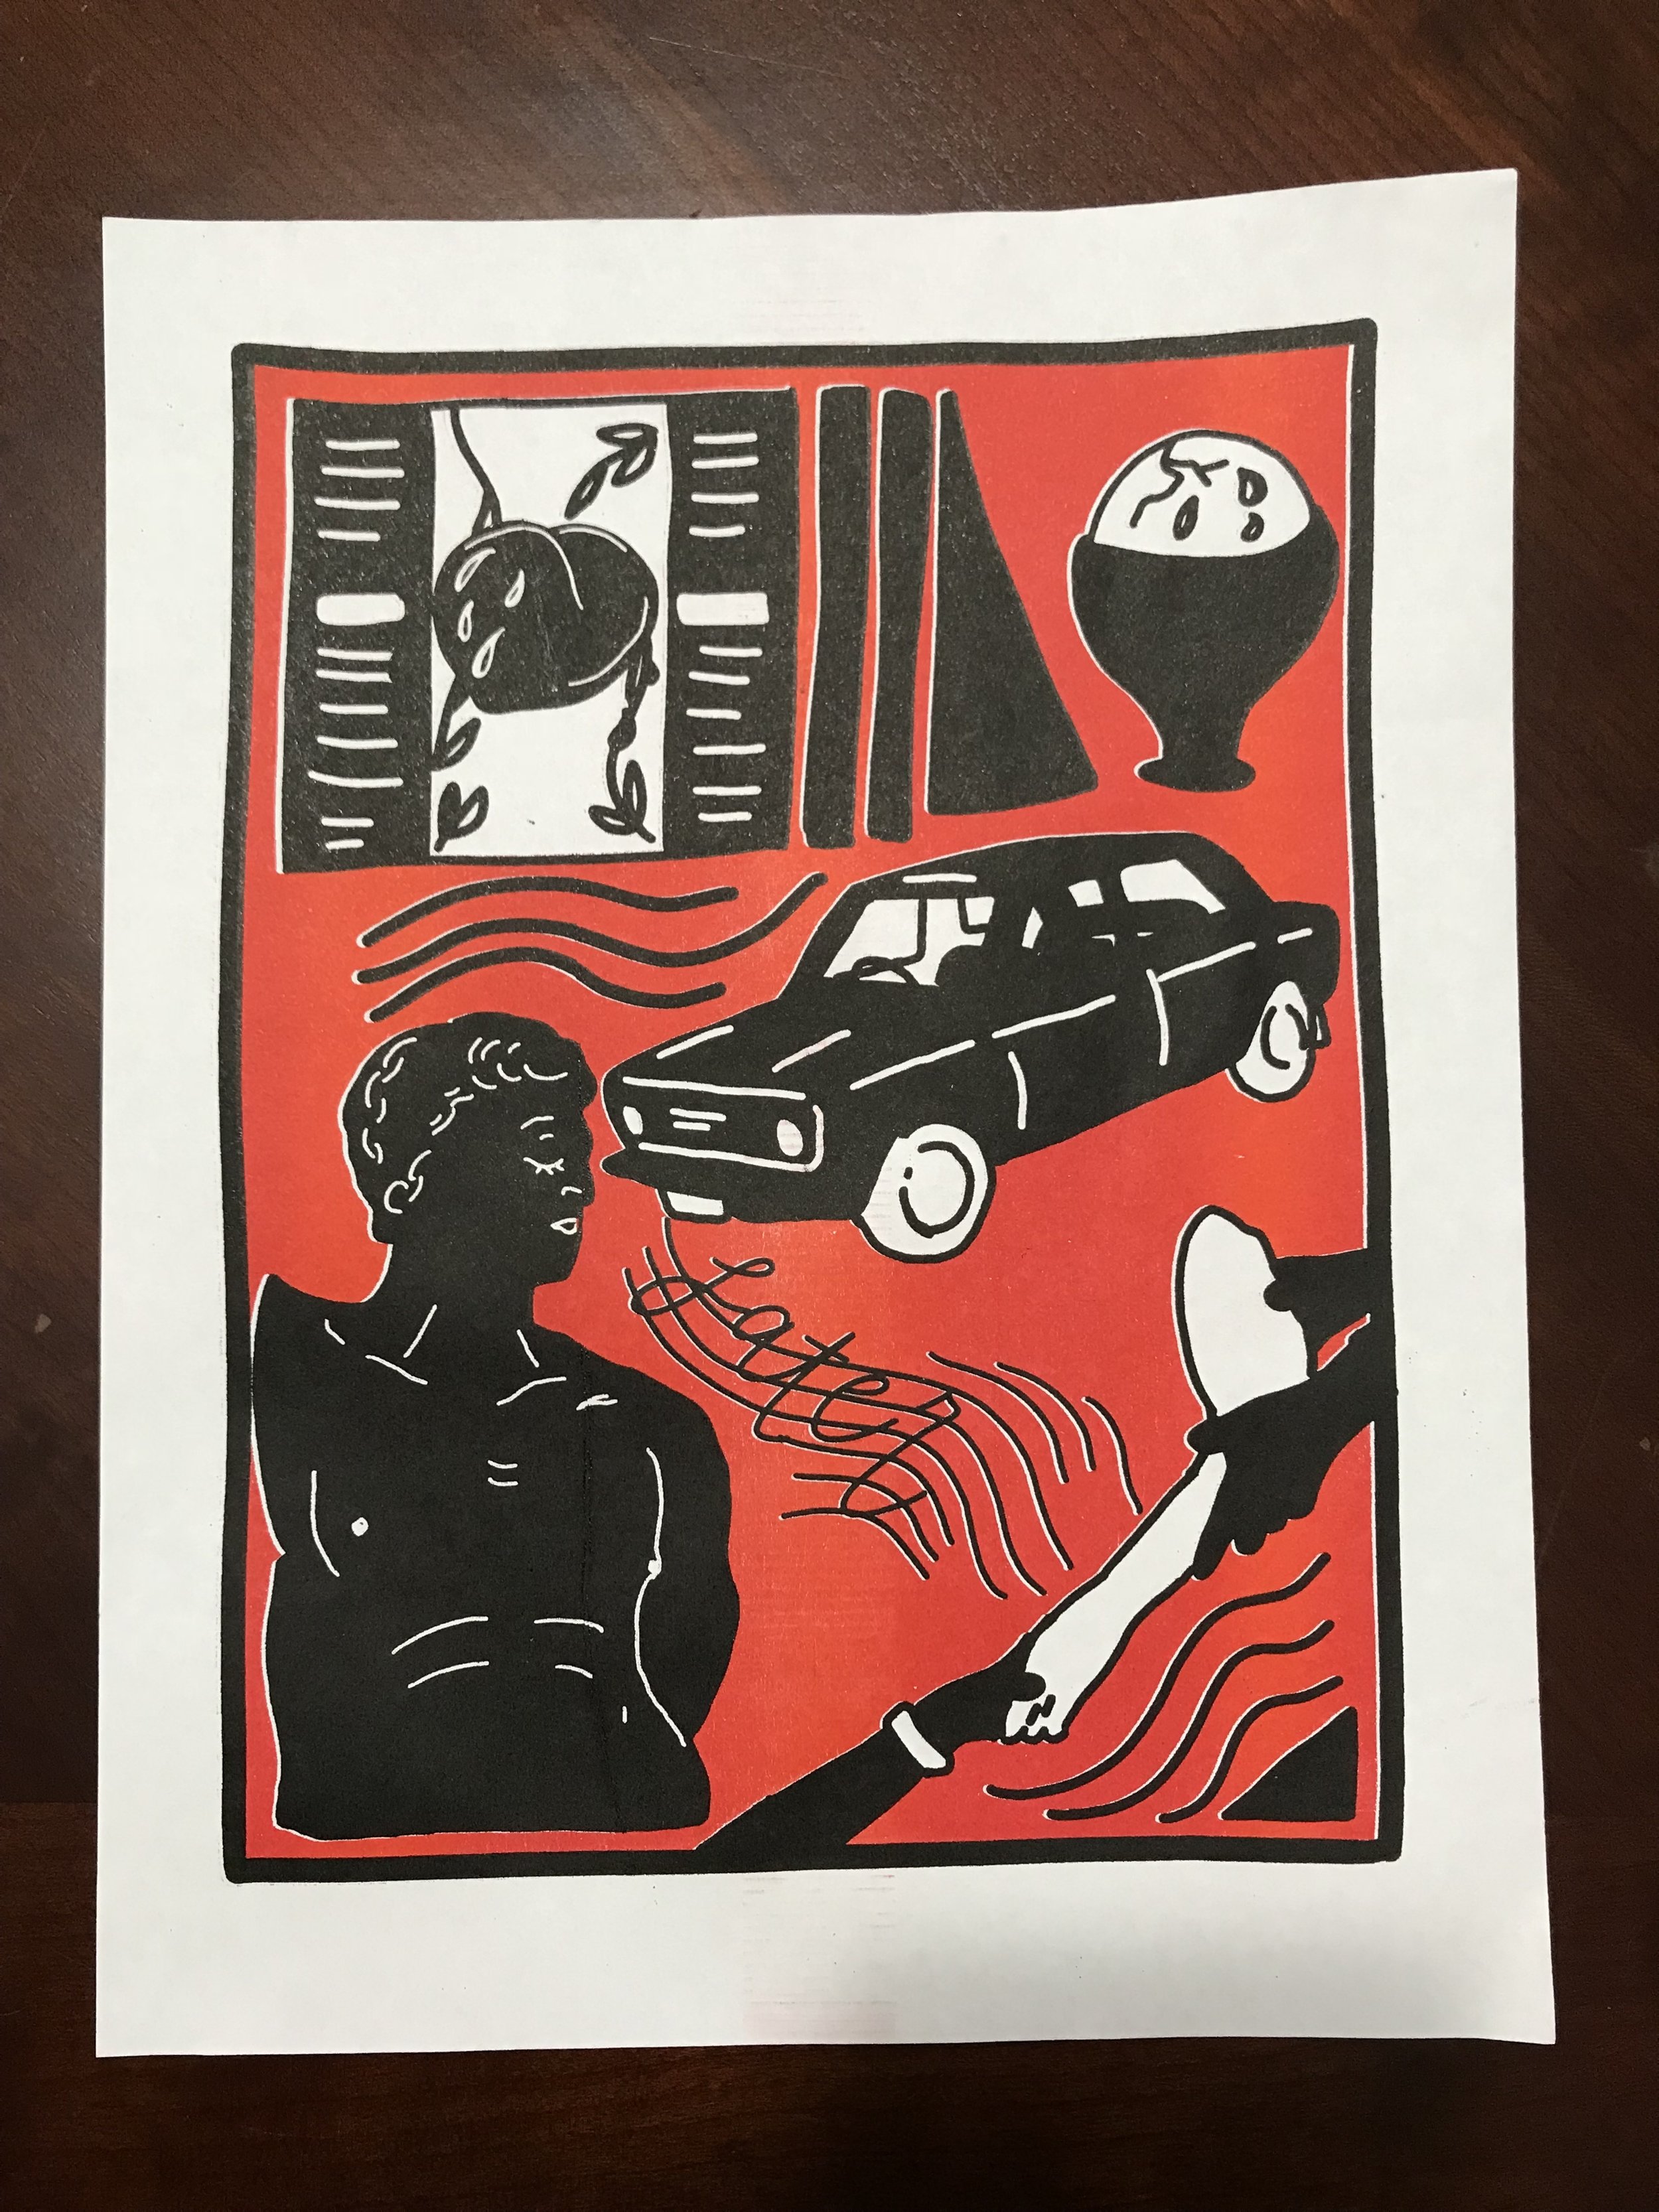 A red and black riso print by Jemimah Barba.